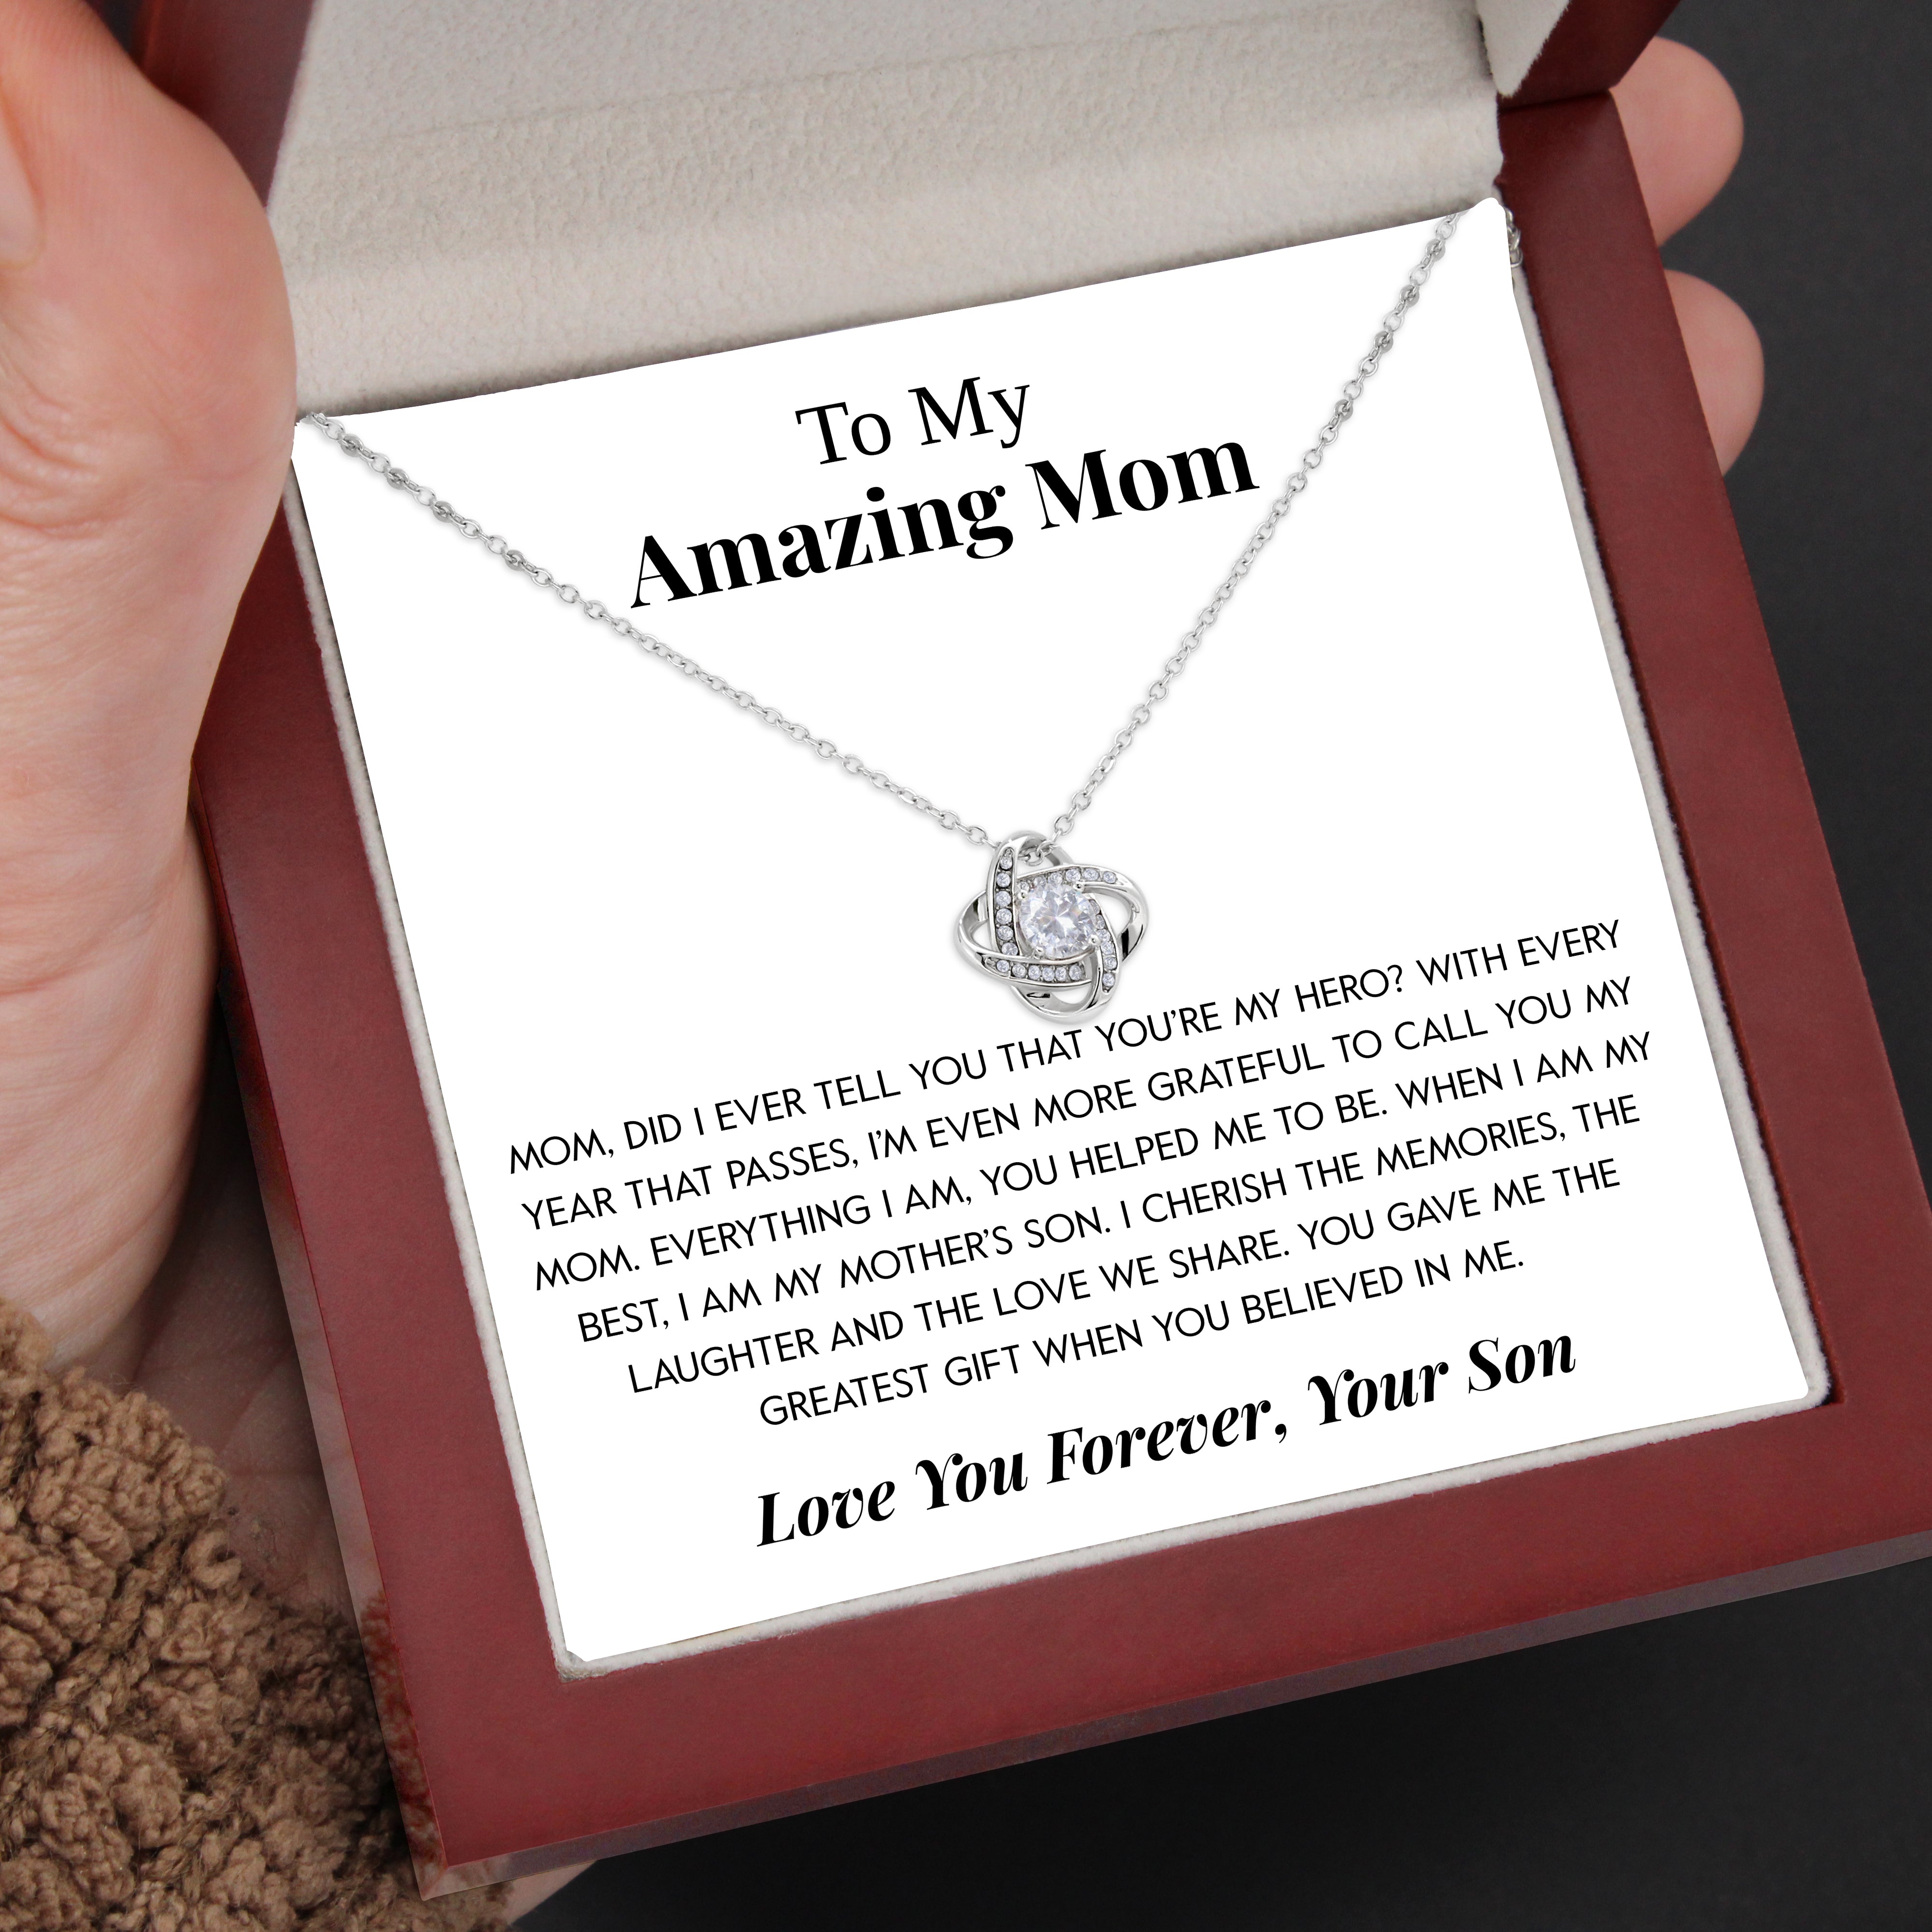 To My Amazing Mom | "The Greatest Gift" | Love Knot Necklace